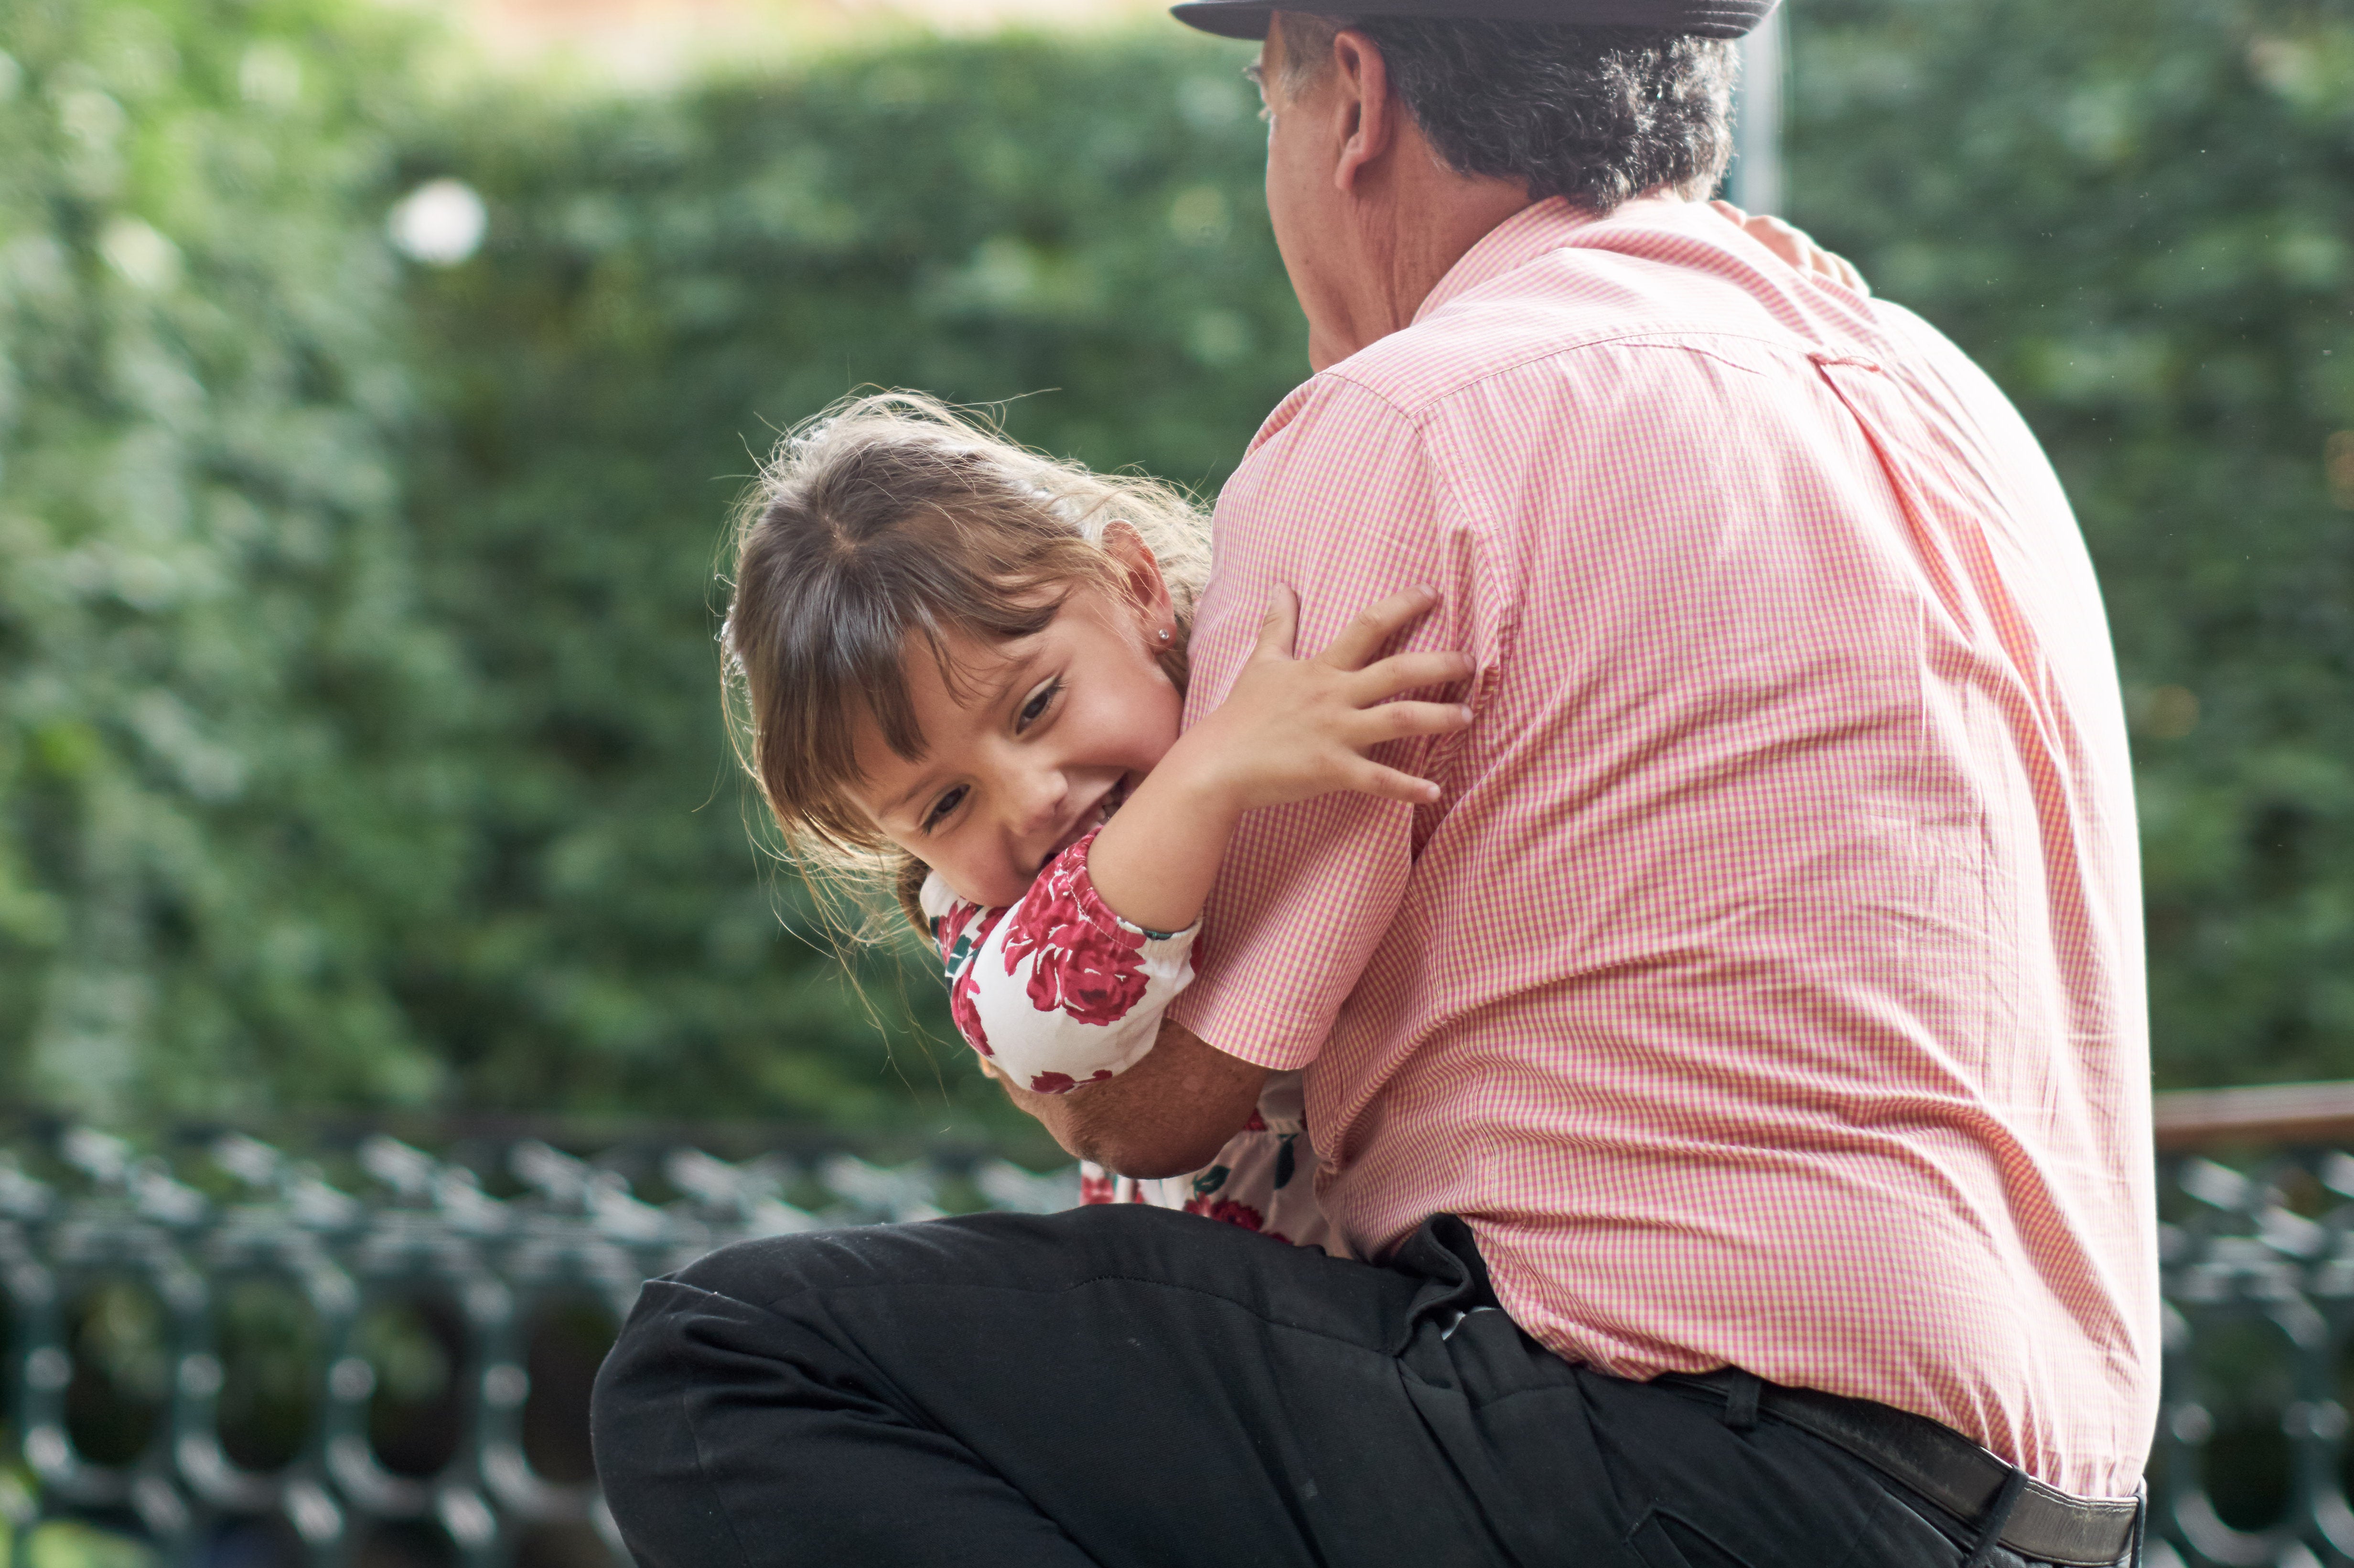 Little girl smiling while being hugged by her grandfather in the park